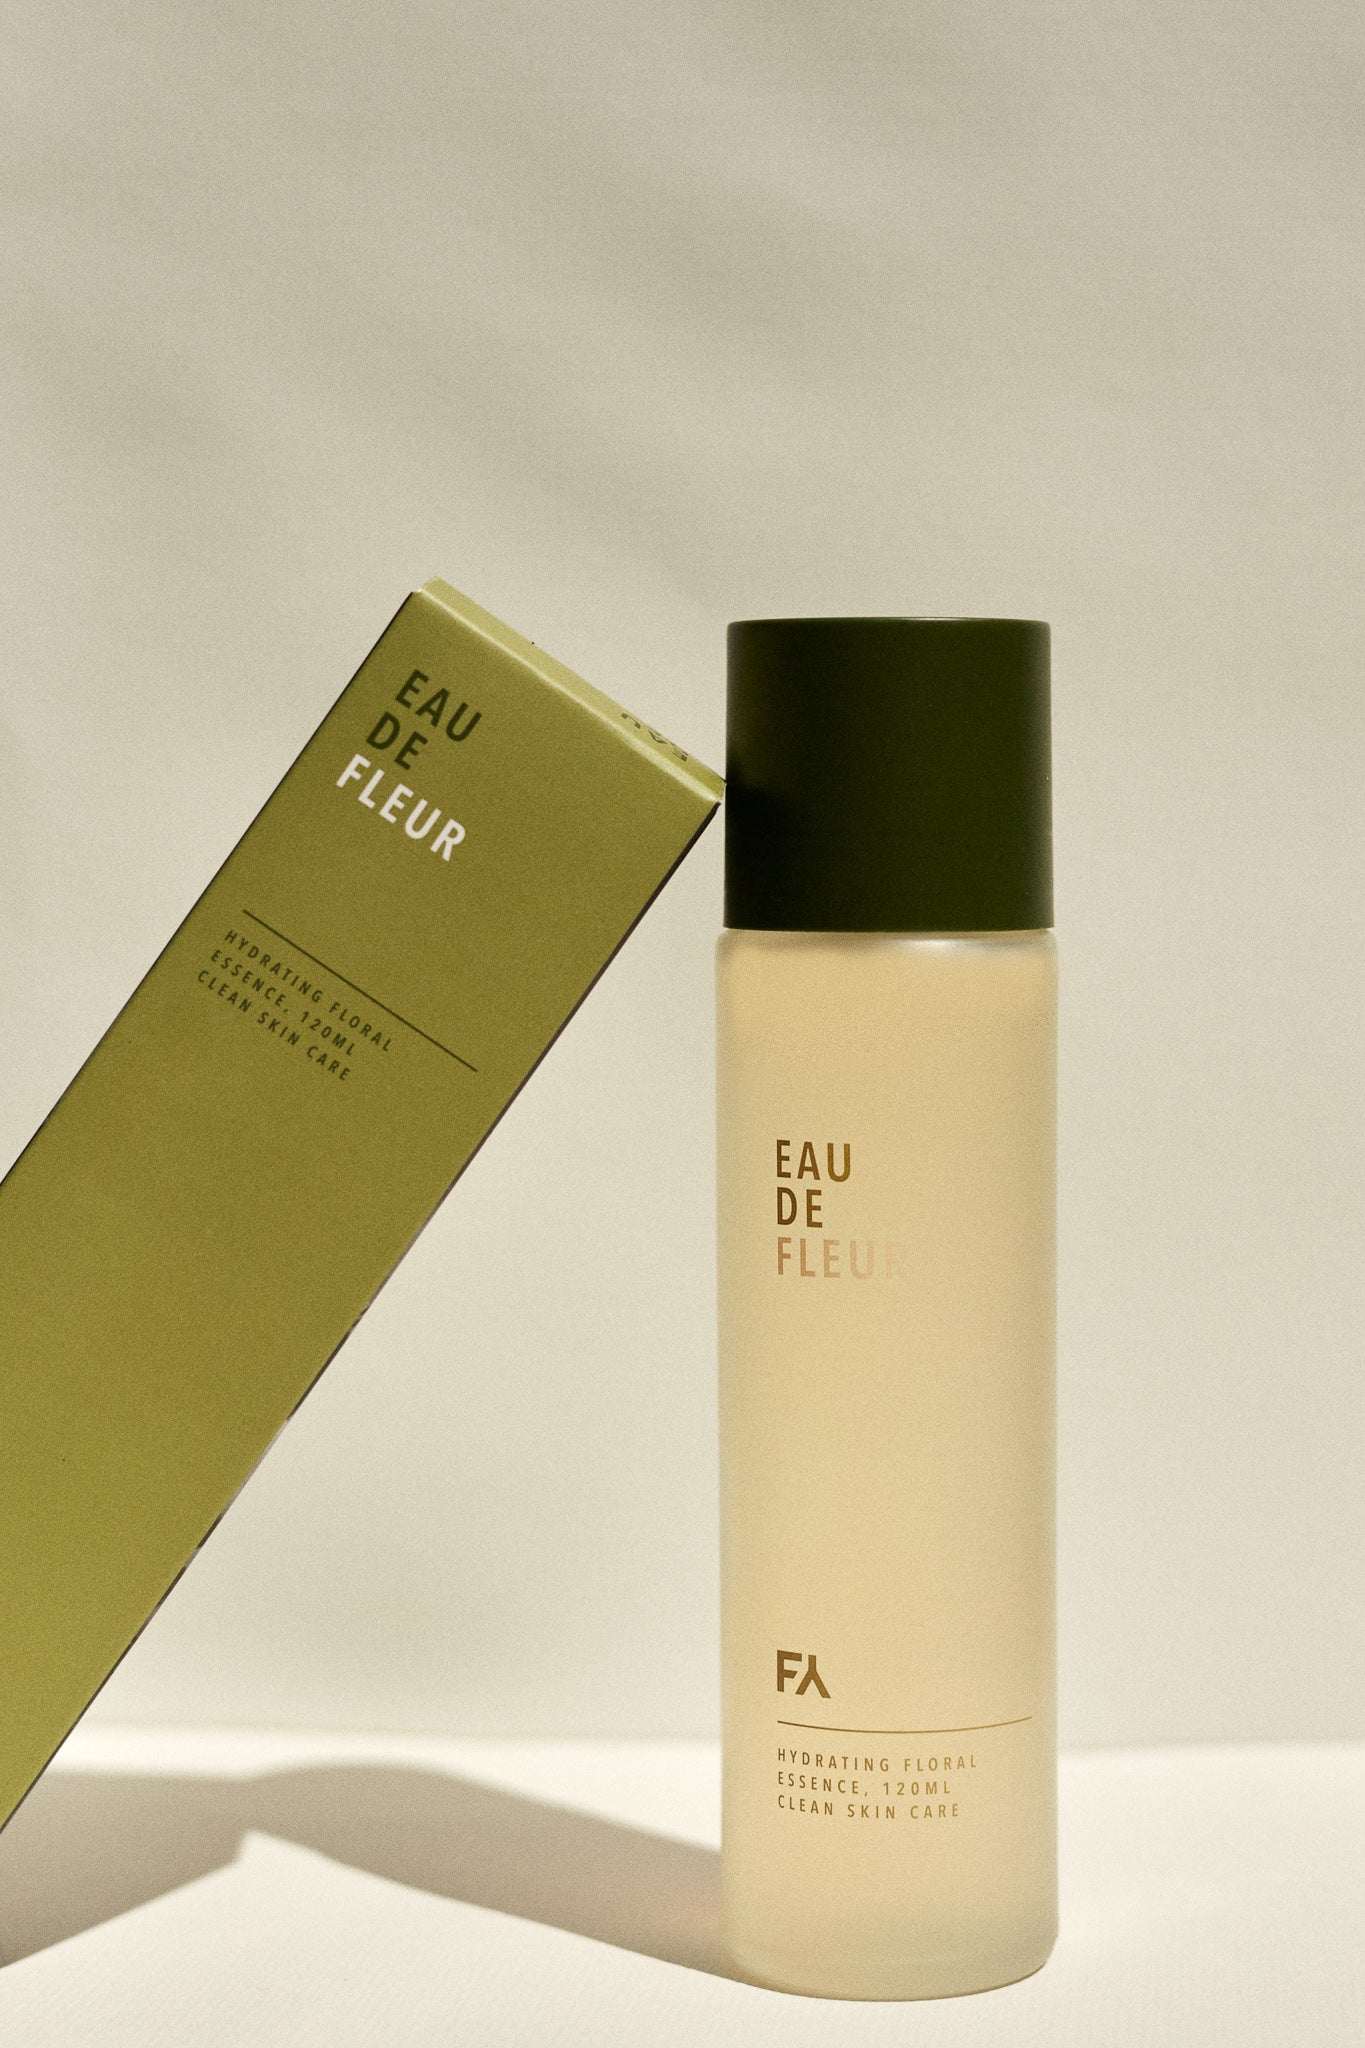 Campaign image of the Eau de Fleur hydrating floral essence by Fields of Yarrow with the packaging